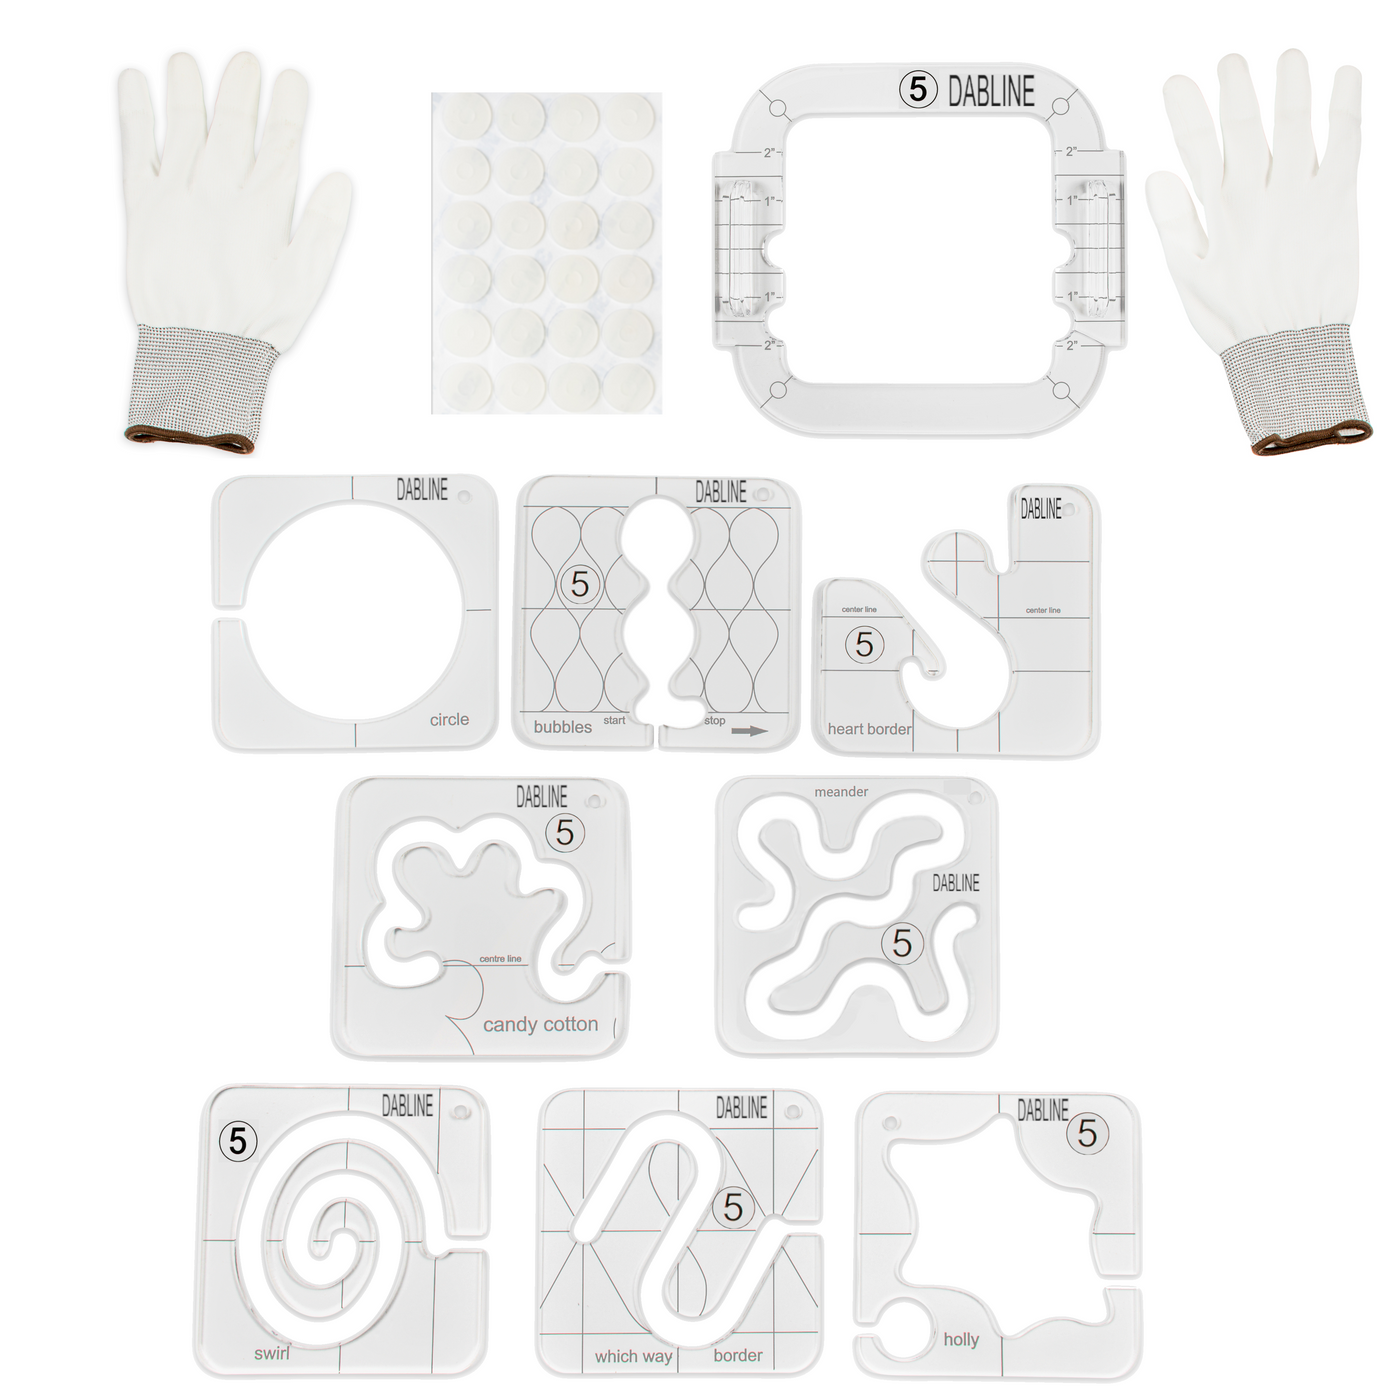 Quilting Template Set includes 5.5"x5.5" quilting frame, quilting stickers, quilting gloves, 8 different quilting templates designs and patterns